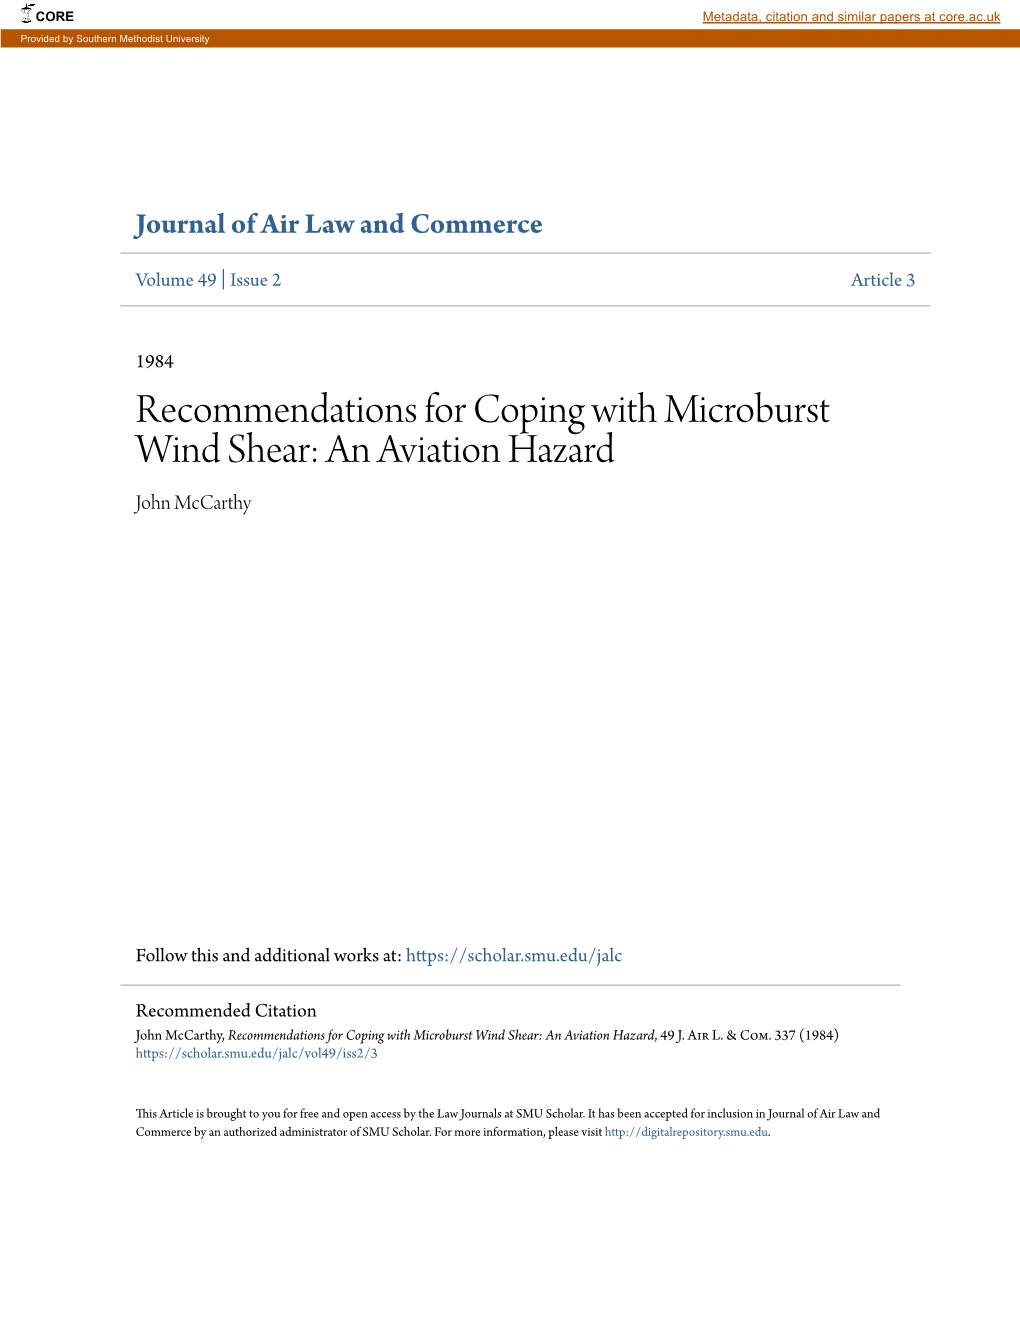 Recommendations for Coping with Microburst Wind Shear: an Aviation Hazard John Mccarthy